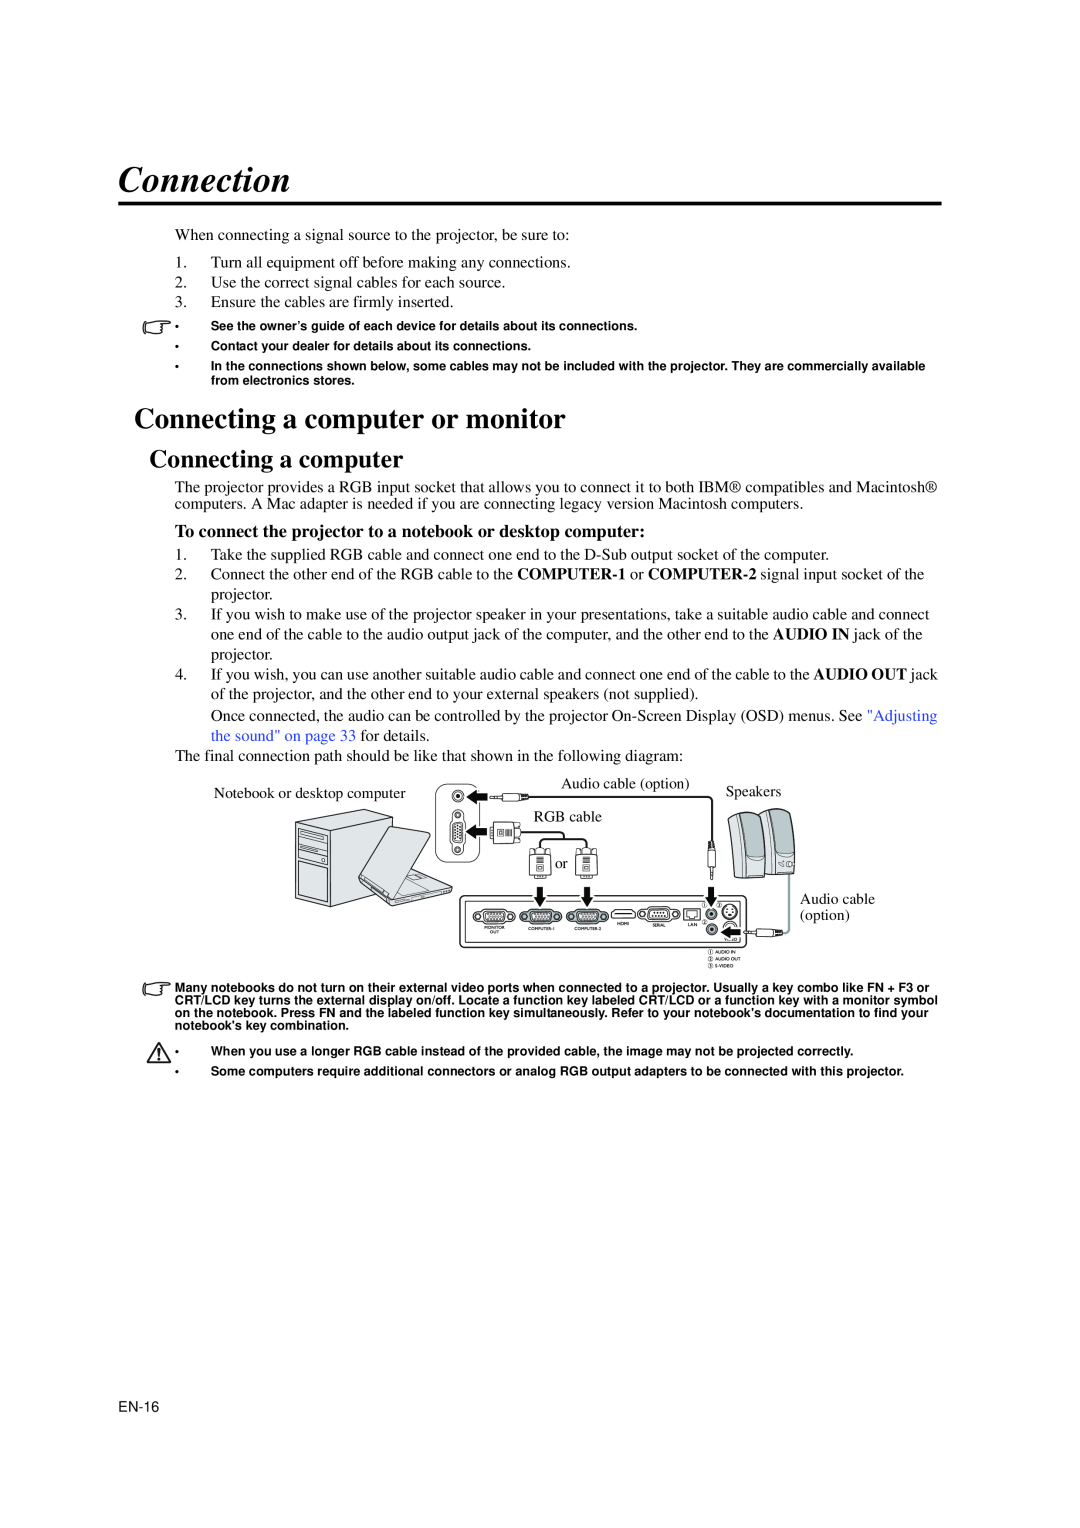 Mitsubishi Electronics EW270U user manual Connection, Connecting a computer or monitor 